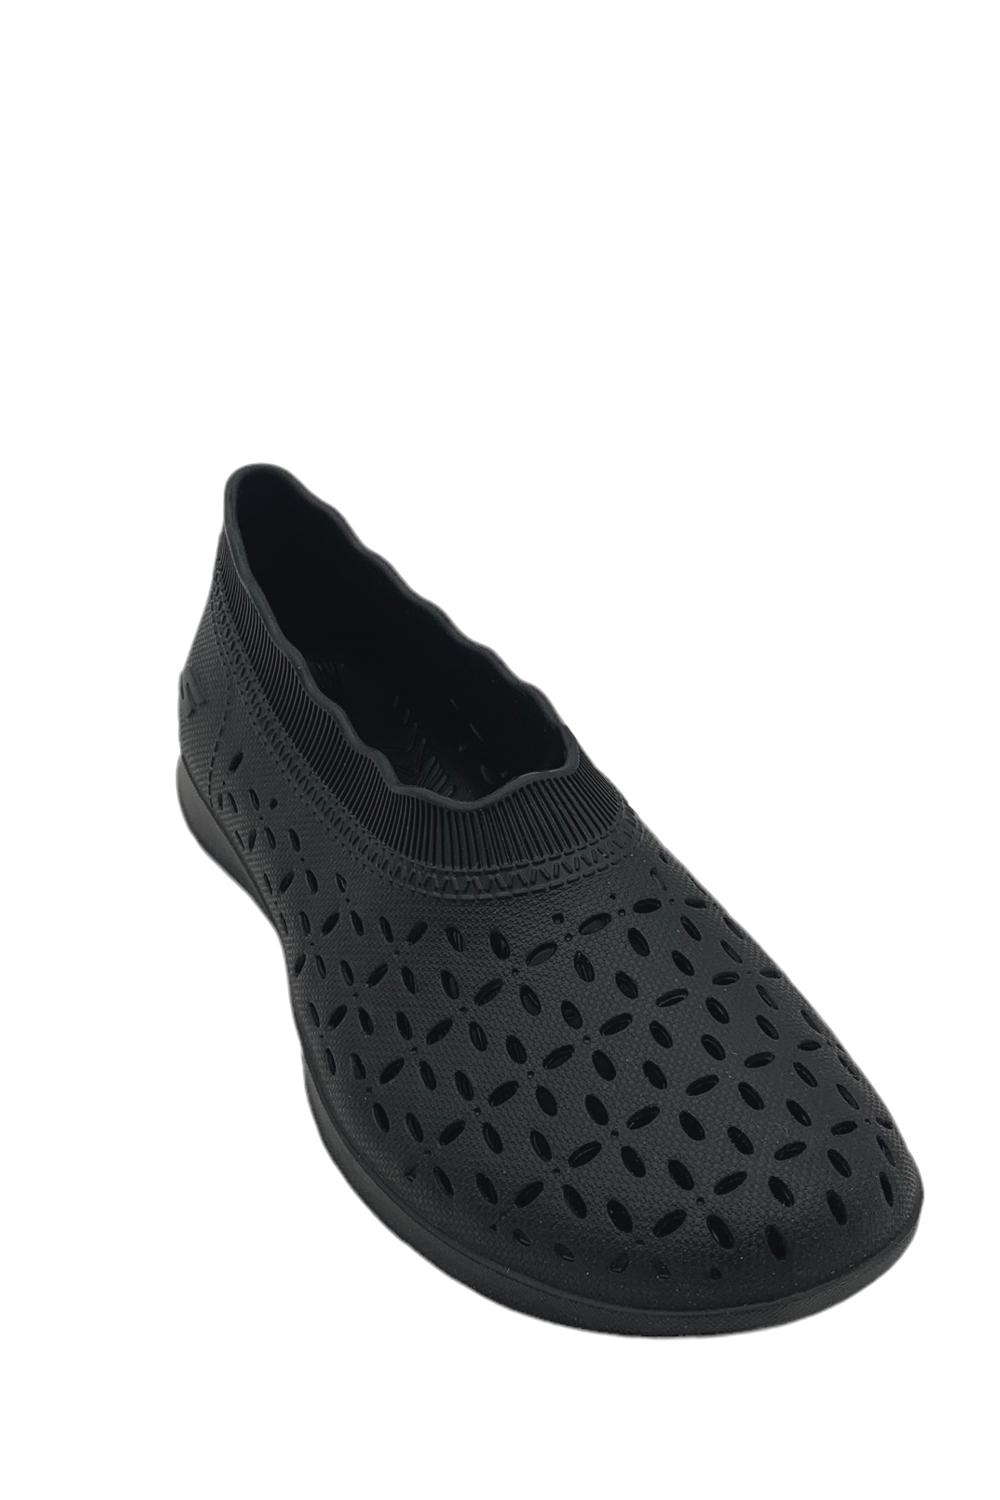 Skechers H2GO Perforated Black |